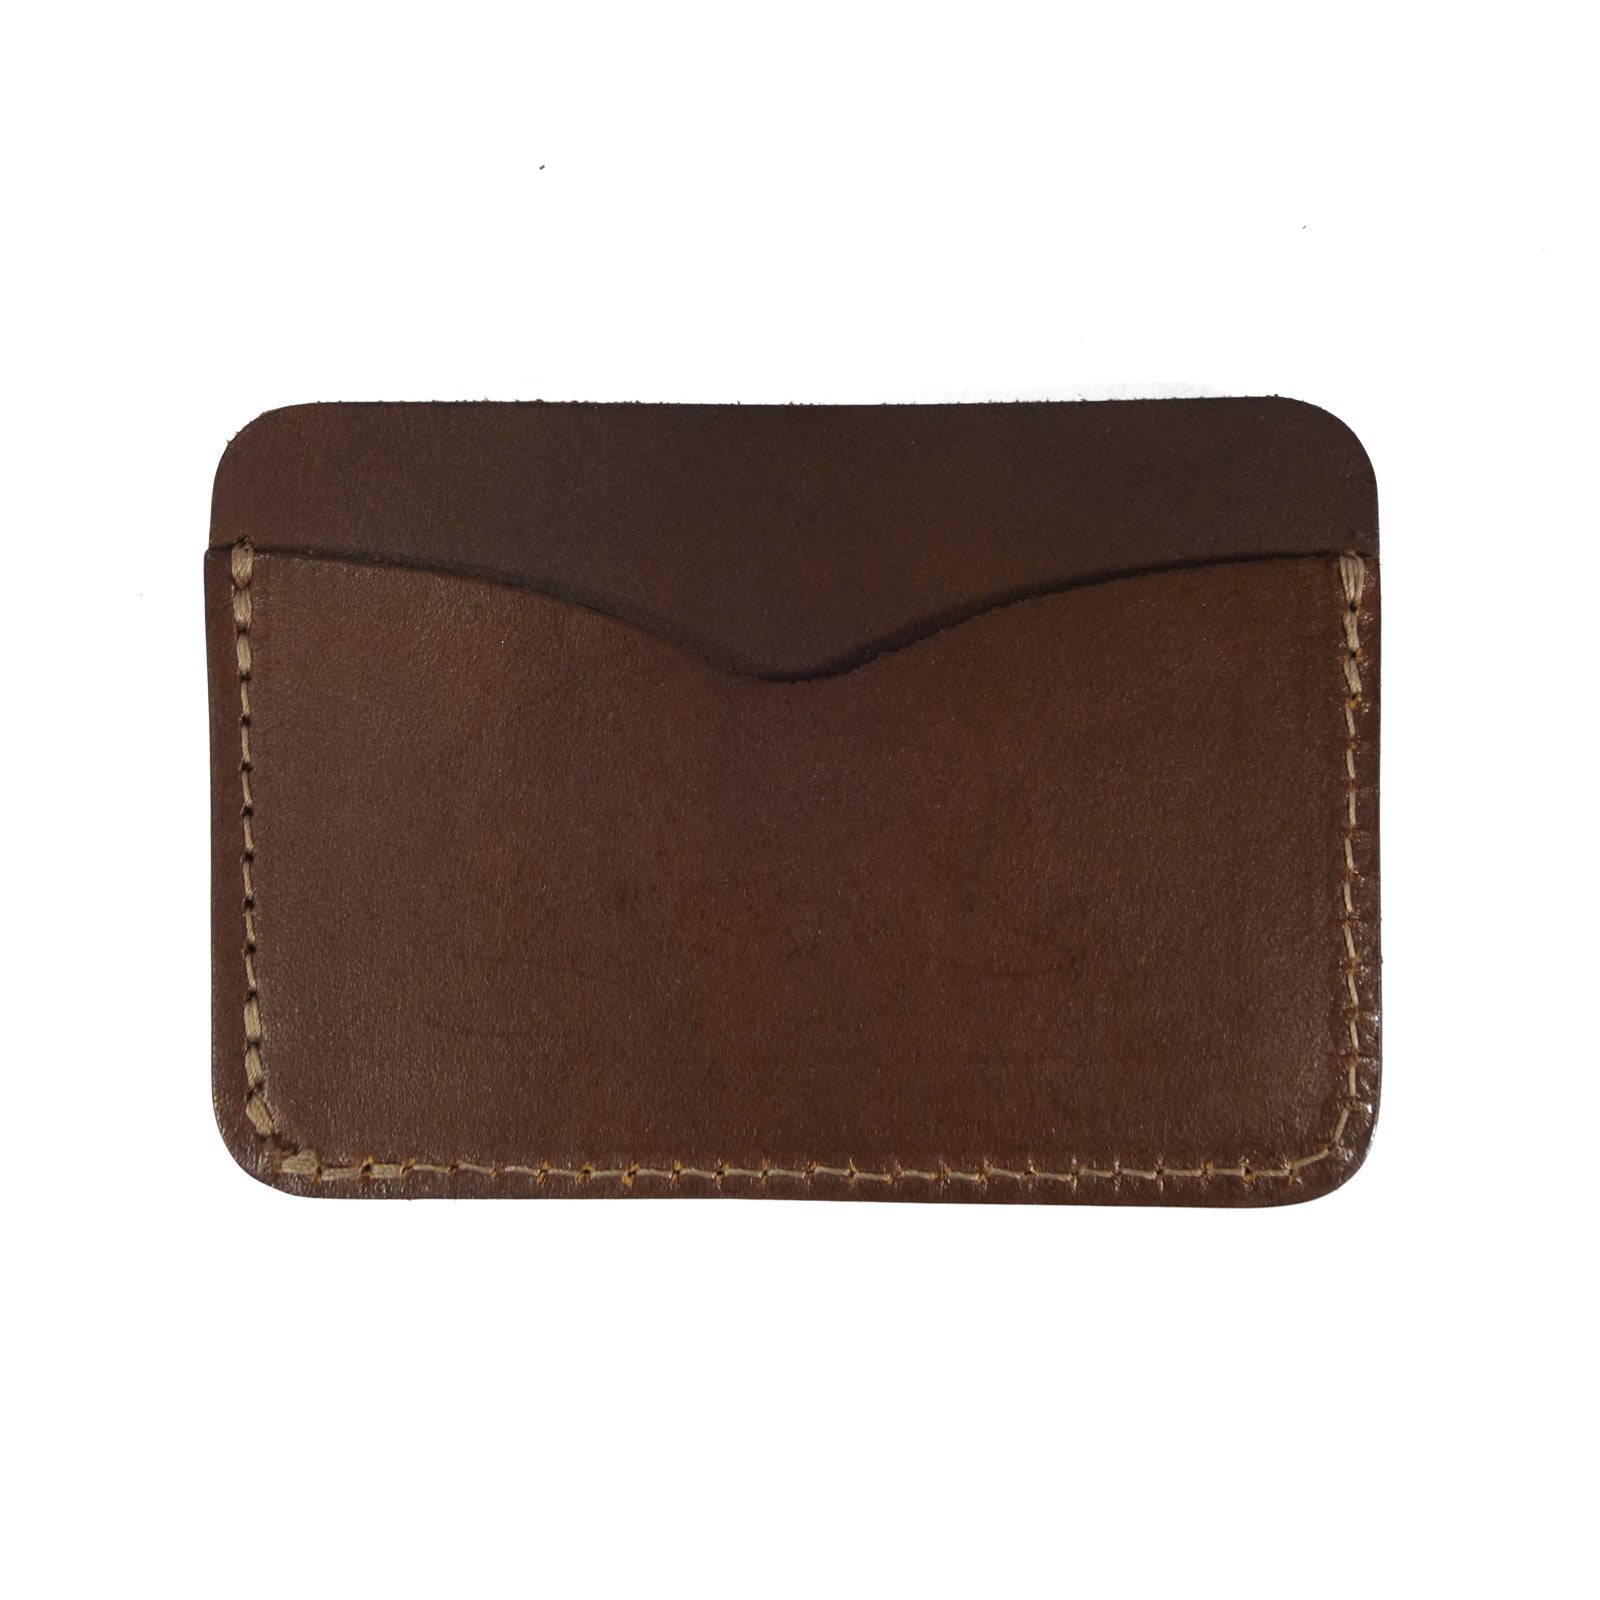 Frontside wallet. Card wallet. slim card case. leather card wallet. For those who like to keep their wallets in their front pockets. Slim enough to comfortably carry and large enough to fit your essential cards and some cash.  3/4oz Herman Oak Vegetable-Tanned Leather 2 Card-Slots, 1 center card slot